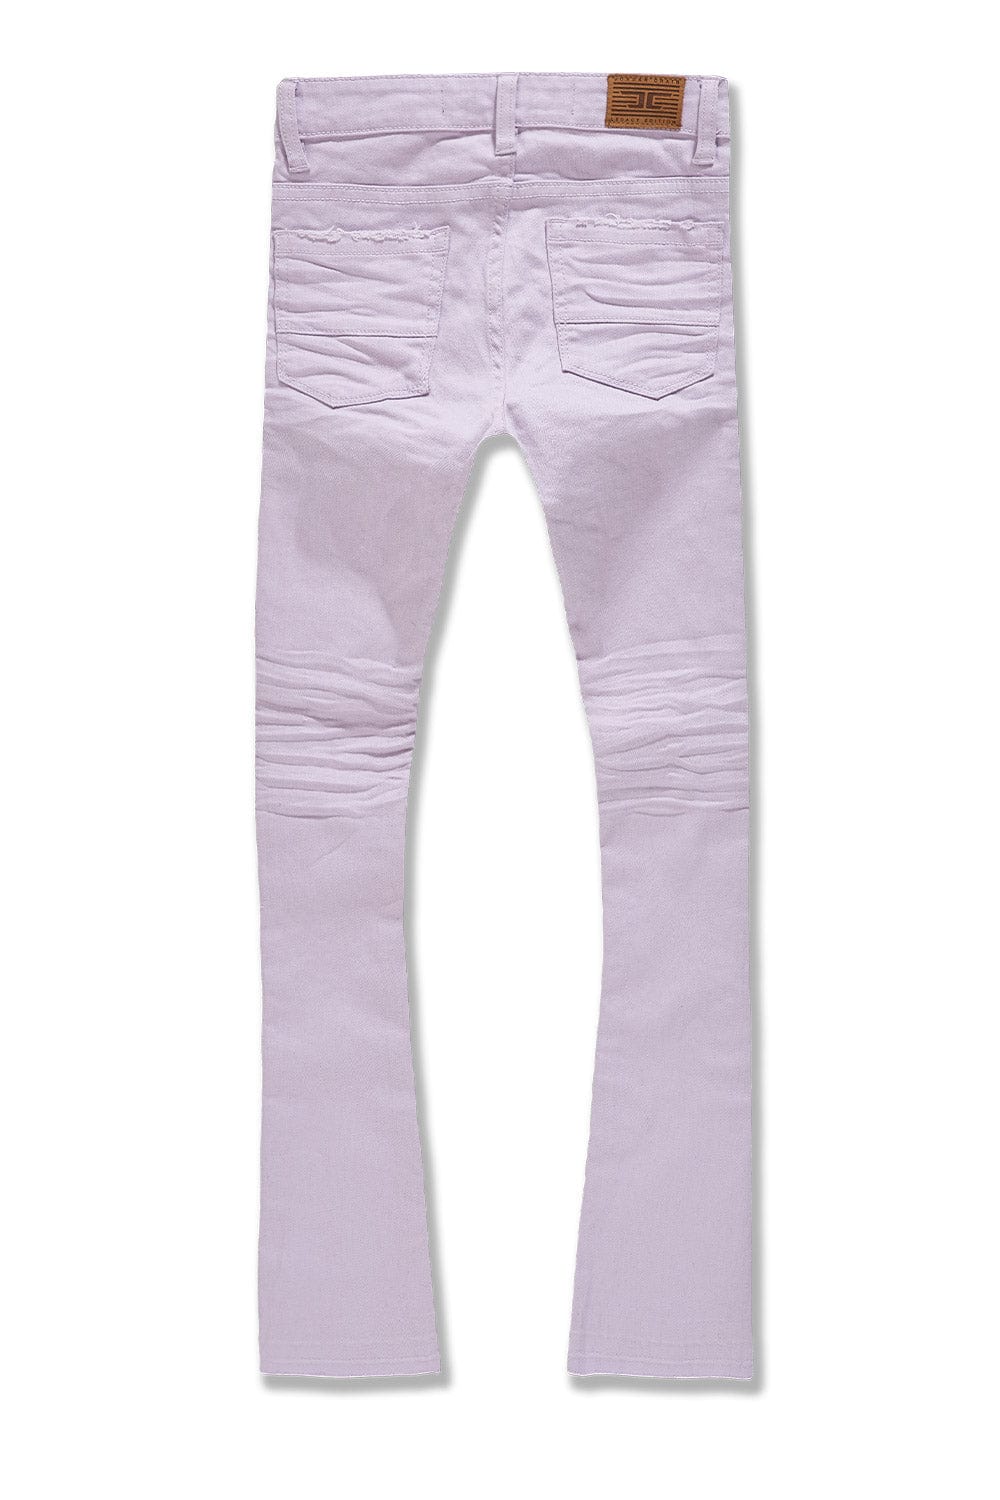 BB Kids Stacked Tribeca Twill Pants (Pastel Lilac)